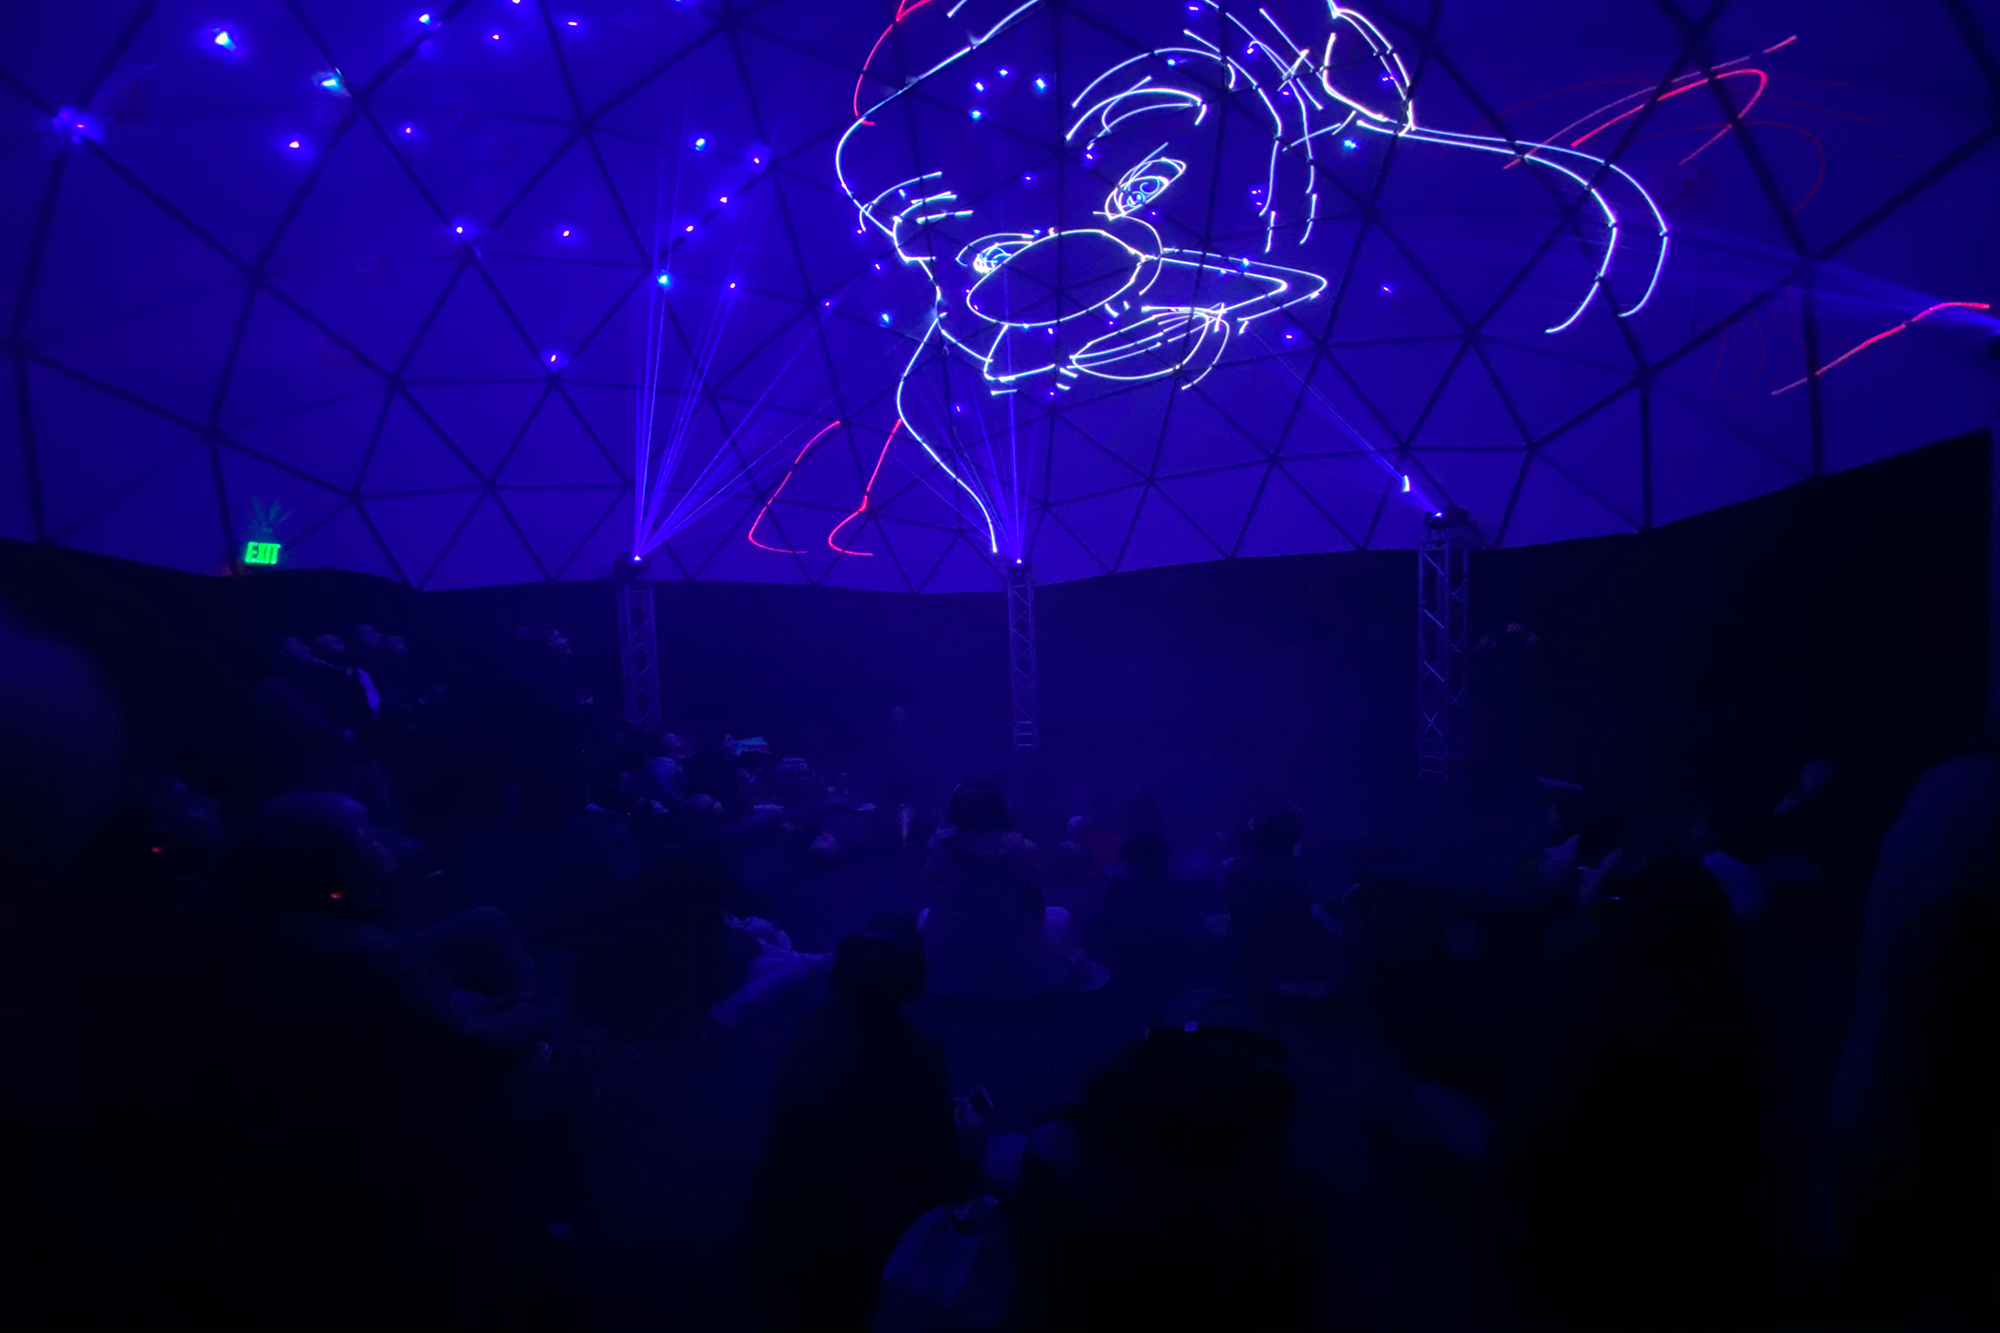 Santa Claus Laser graphic in Holiday laser dome